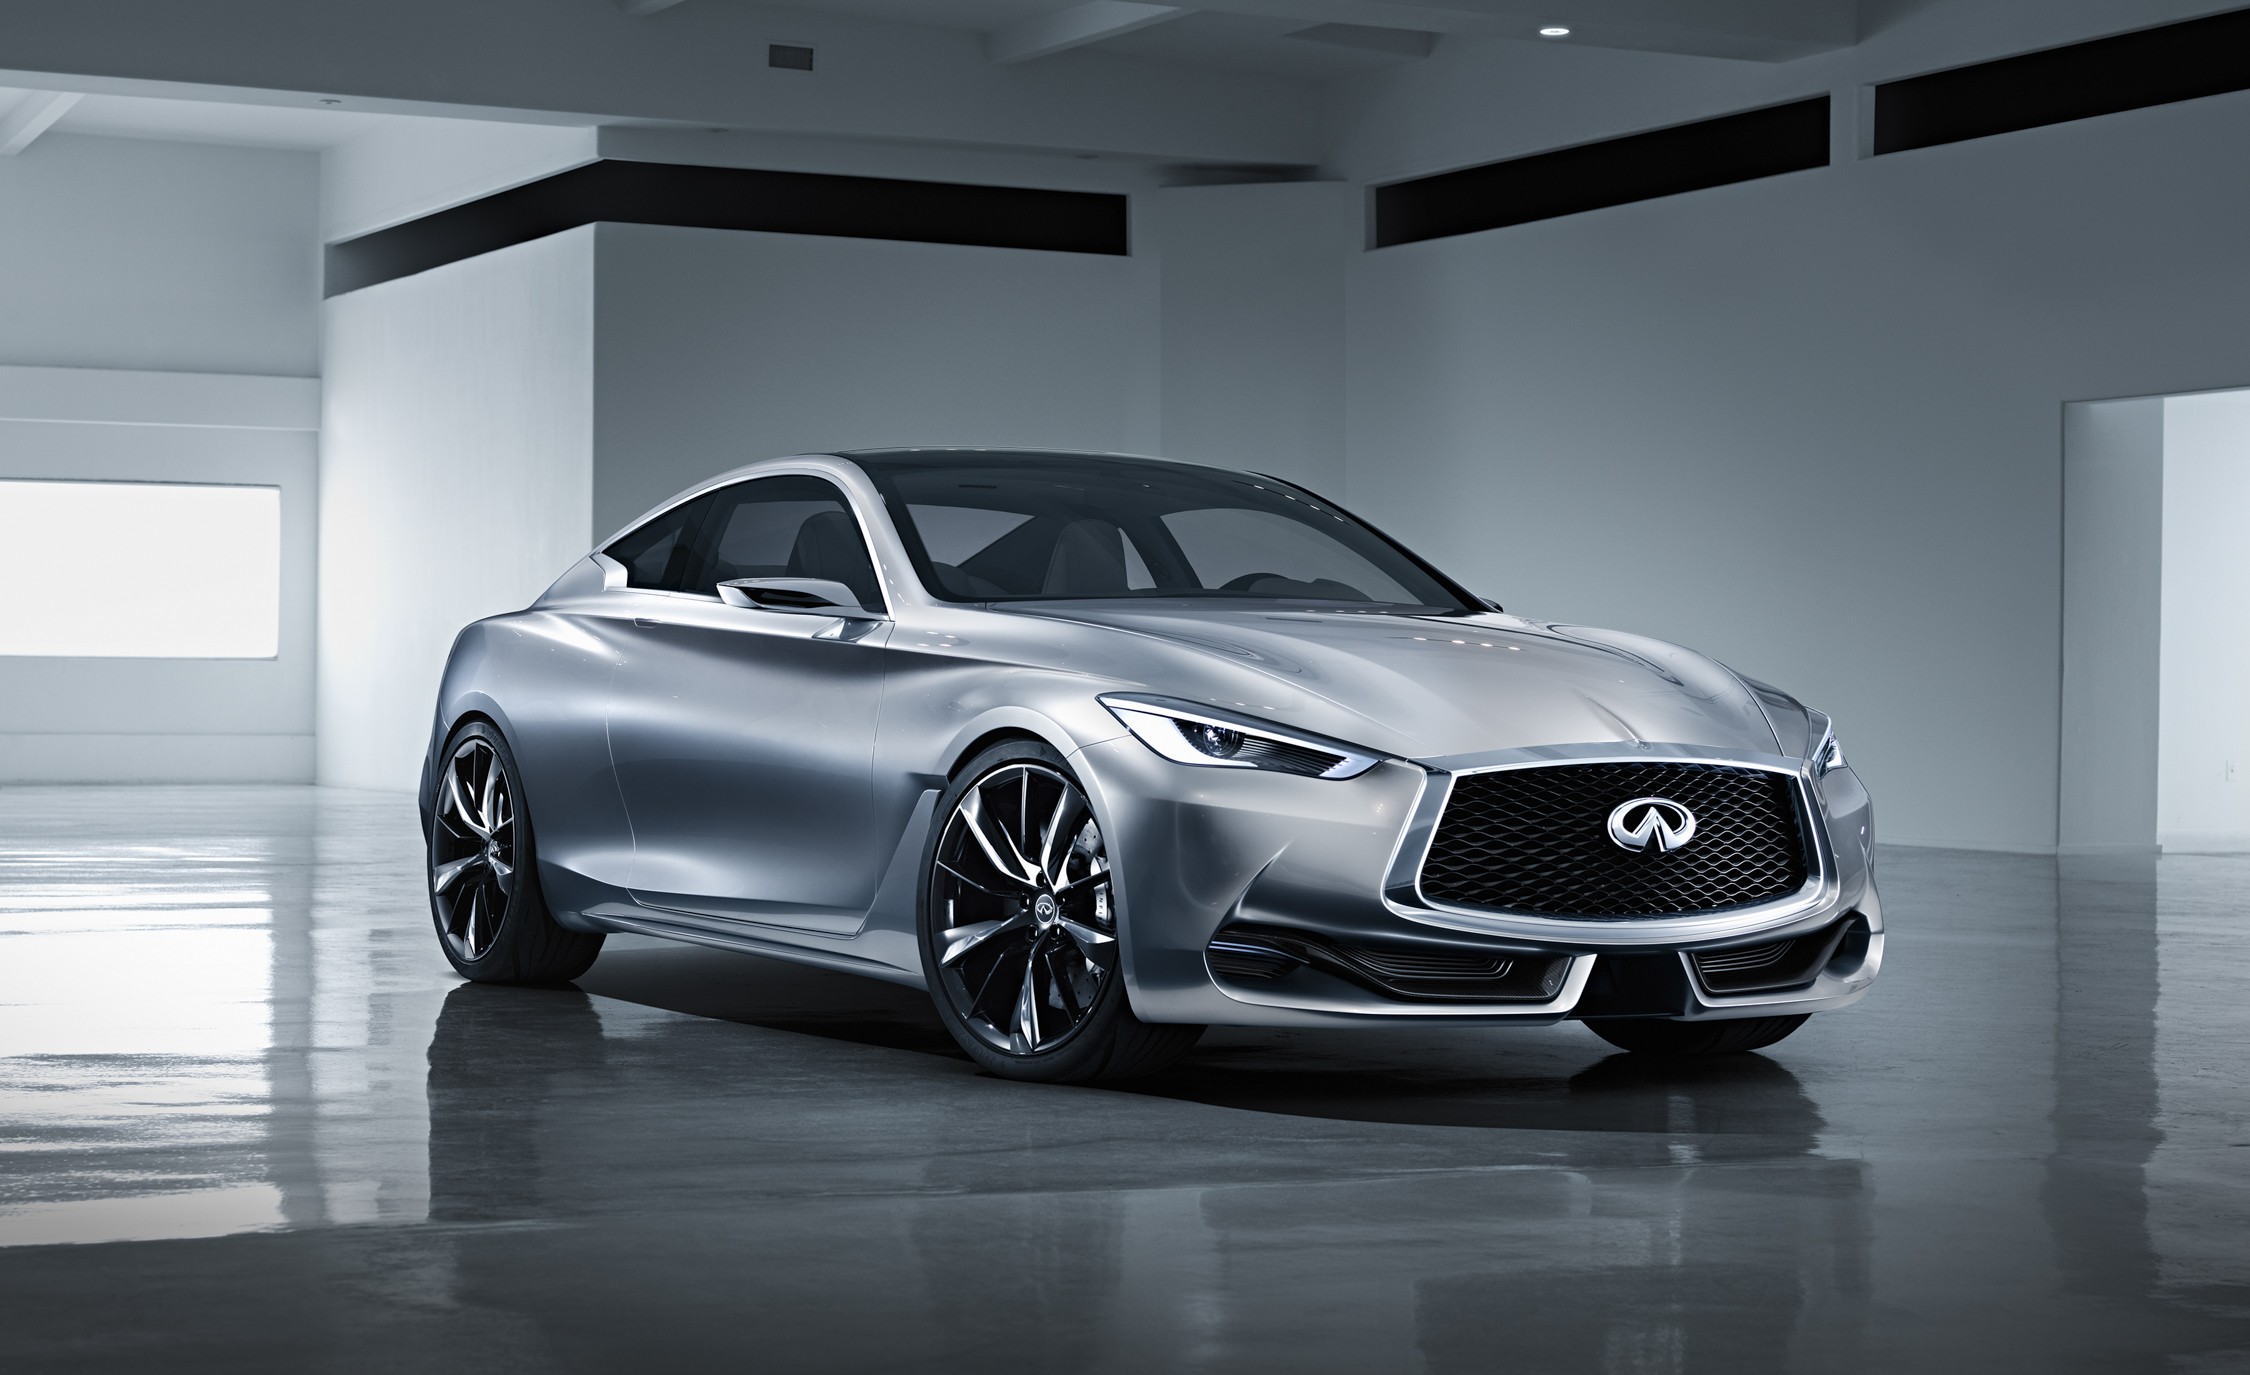 General 2250x1375 Infiniti 2015 Infiniti Q60 Coupe concept cars car vehicle silver cars Japanese cars